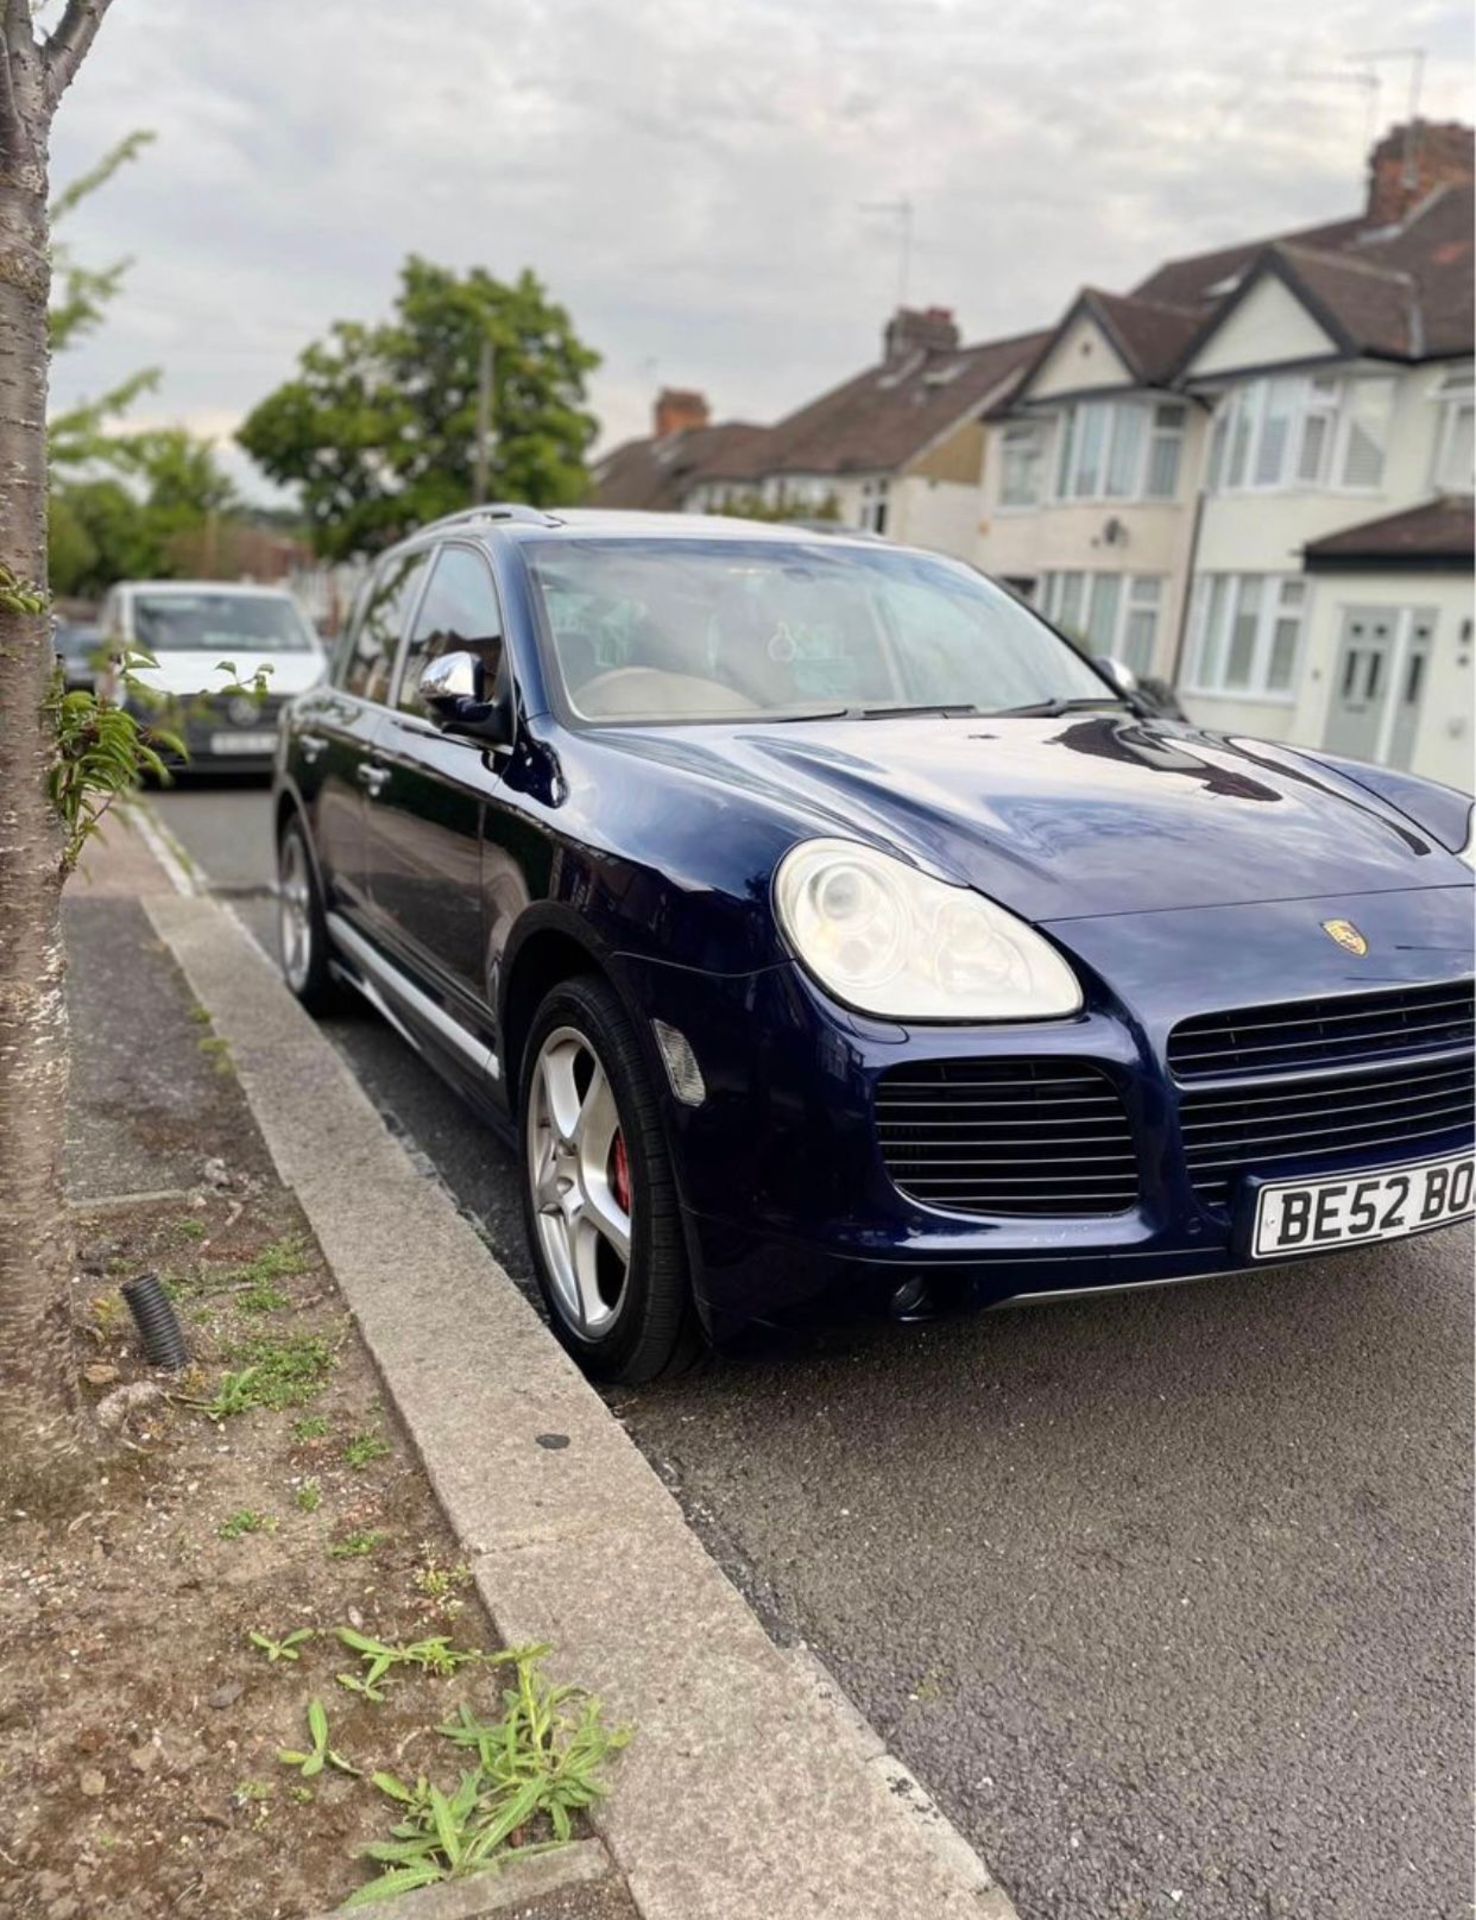 2007 Porsche Cayenne Turbo S (521hp from factory) - ULEZ FREE - BE52 BOO